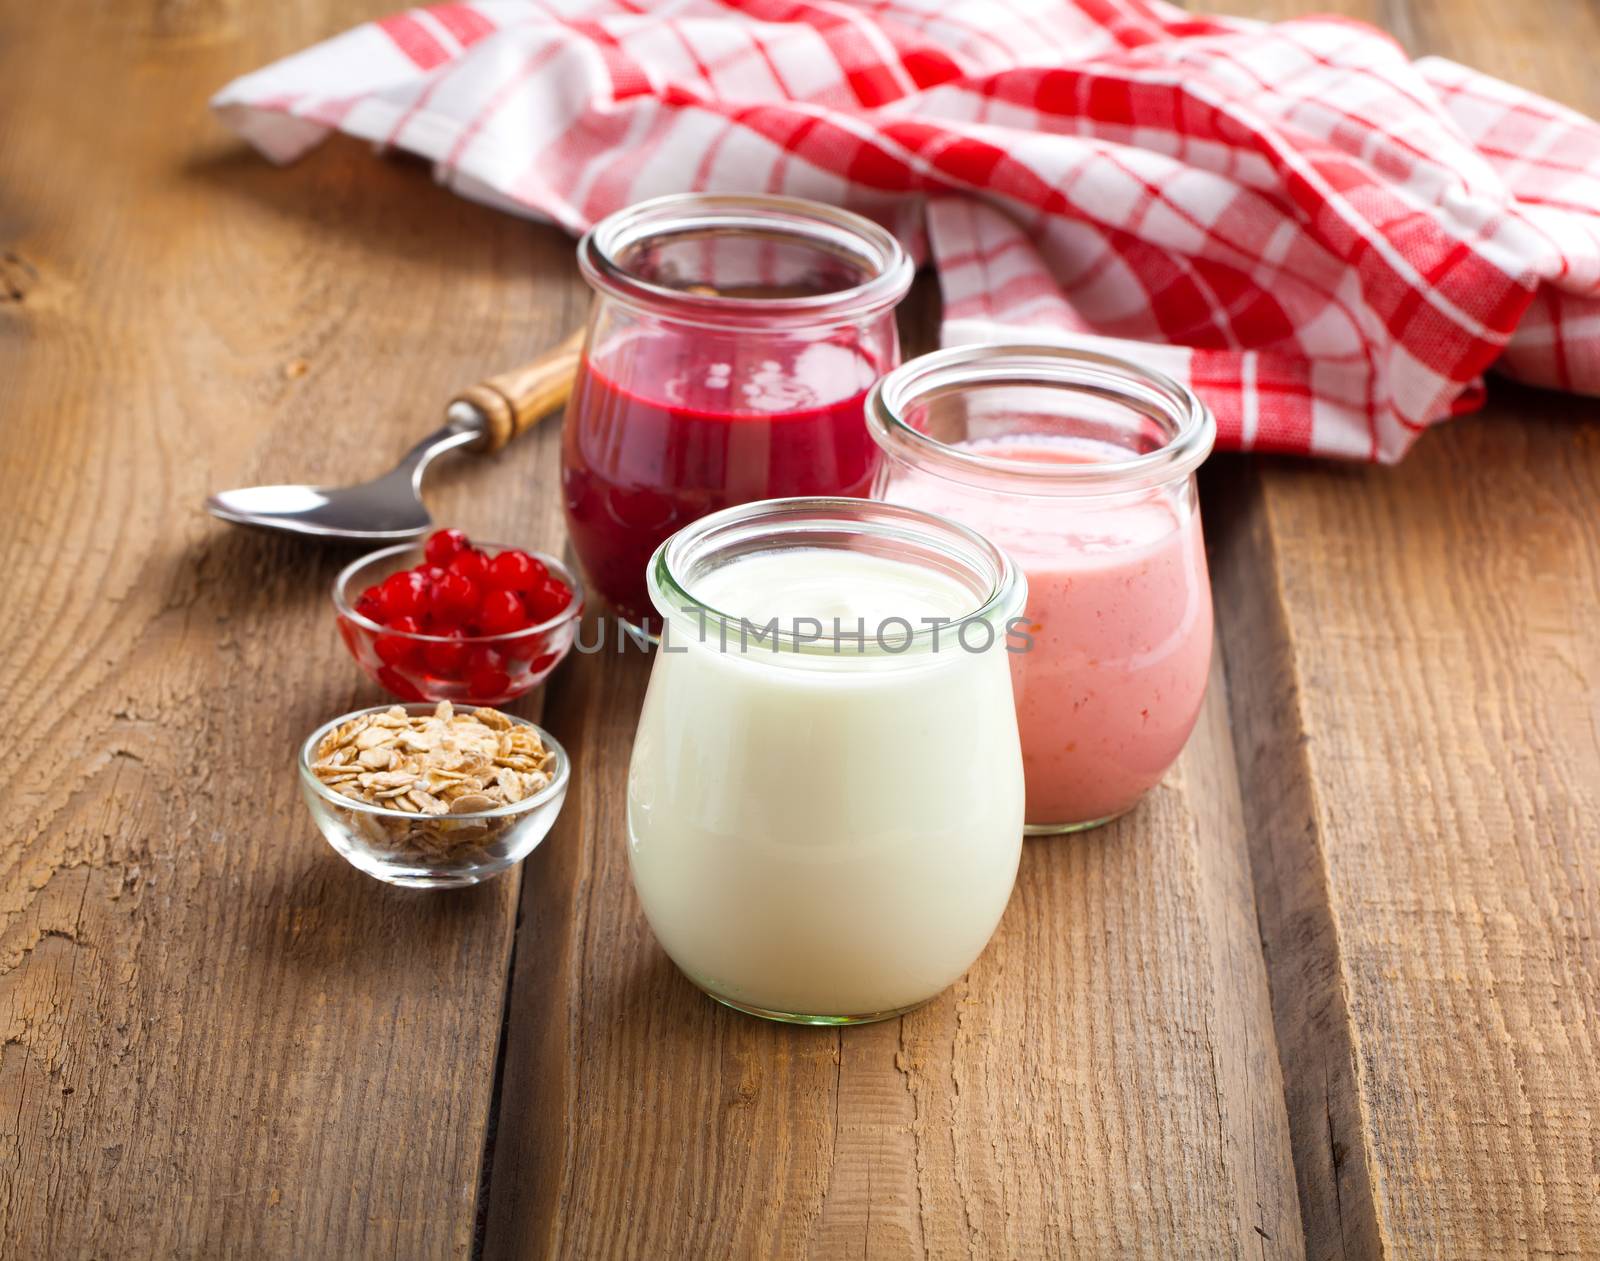 Healthy yougurt with berry in a glass jars on wooden background by motorolka